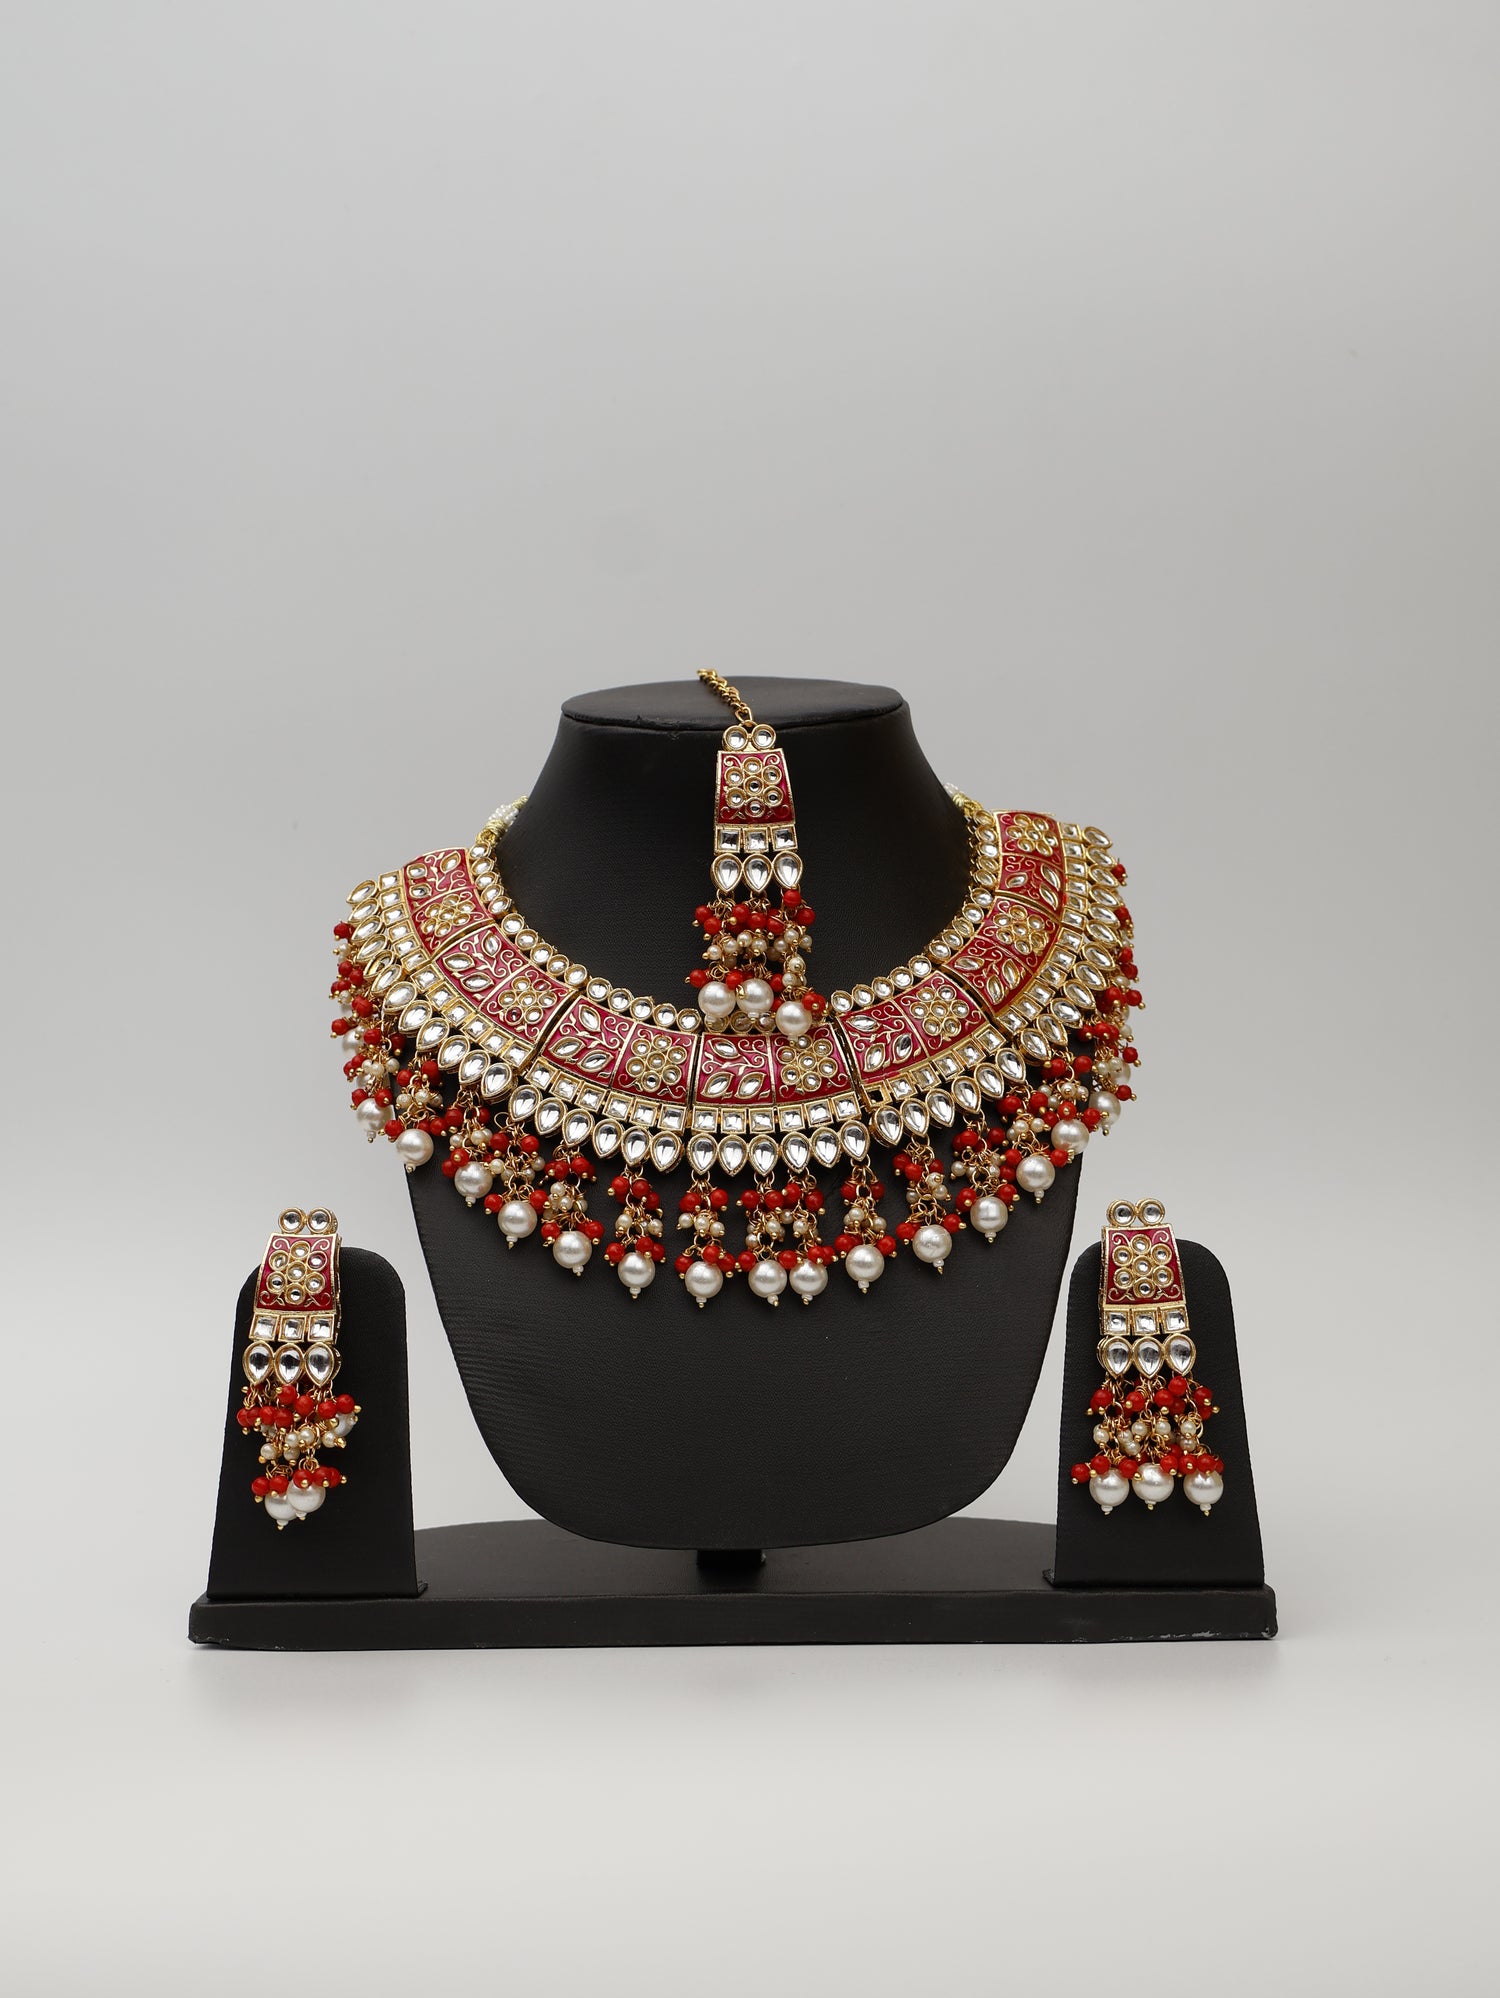 Red Meenakari Kundan &amp; Pearl Necklace Set with Earrings &amp; Mang Tikka. Fashion Jewelry for Party Festival Wedding Occasion in Noida